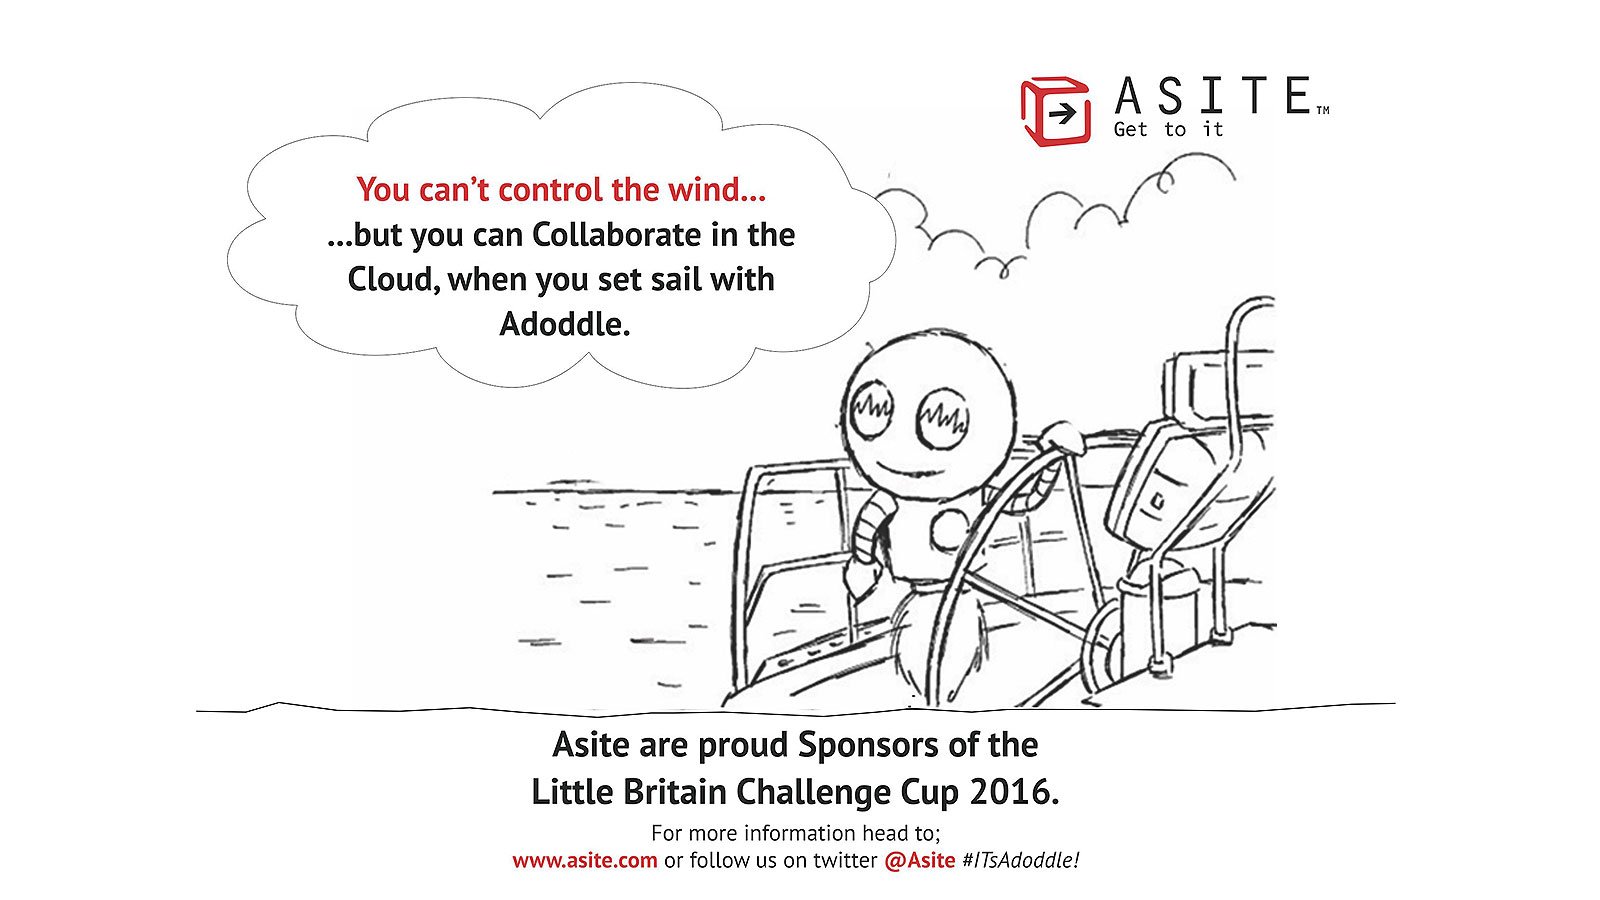 Asite are Silver Sponsors of The Little Britain Challenge cup for the 3rd year running. 